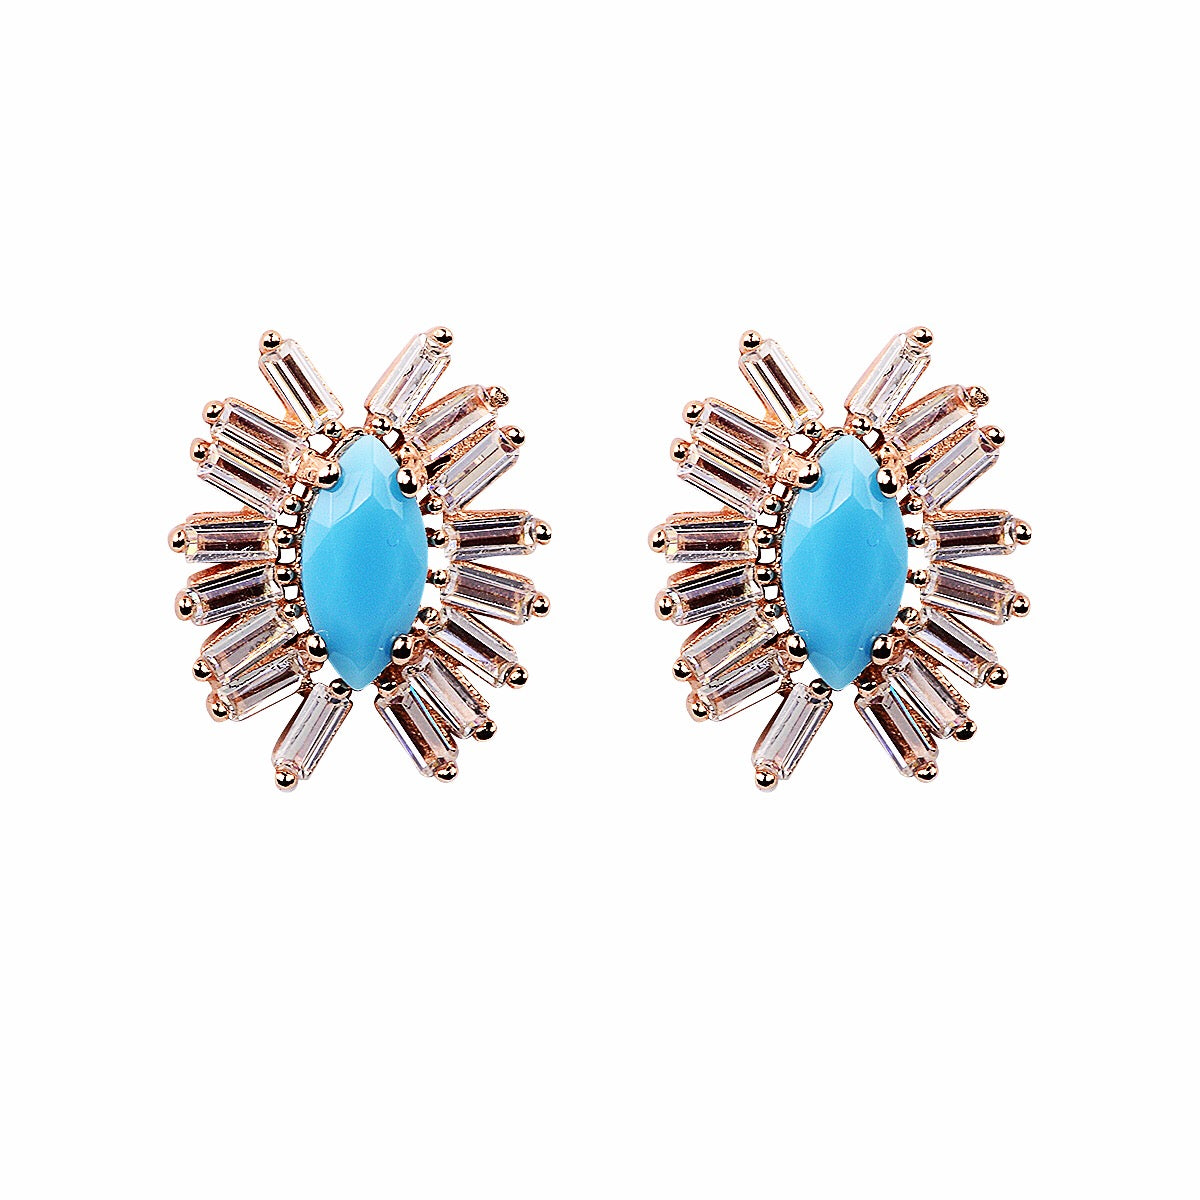 Turquoise baguette studs